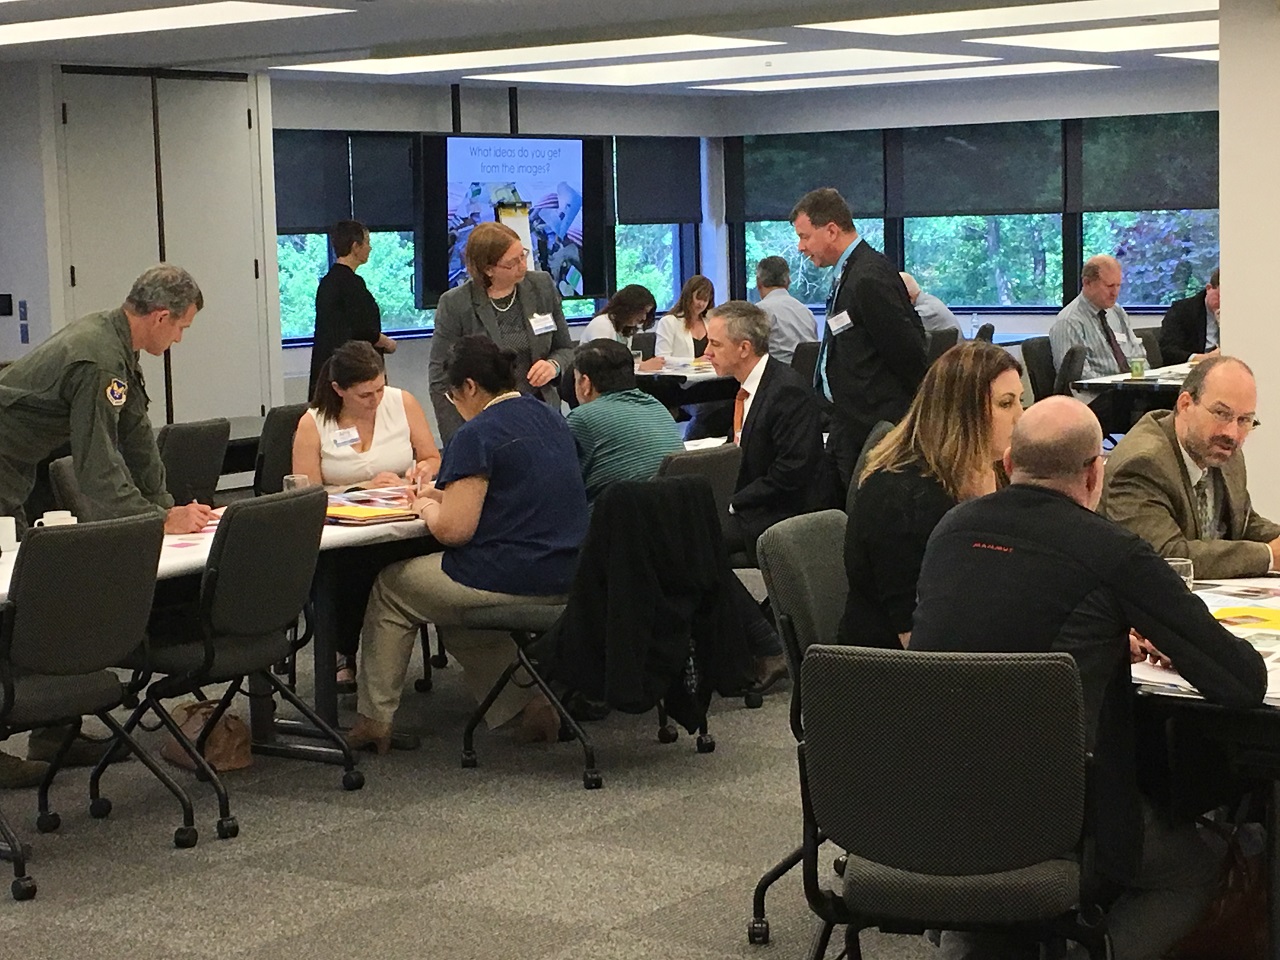 Workshop attendees participate in brainstorming activities for the future of aviation security.  